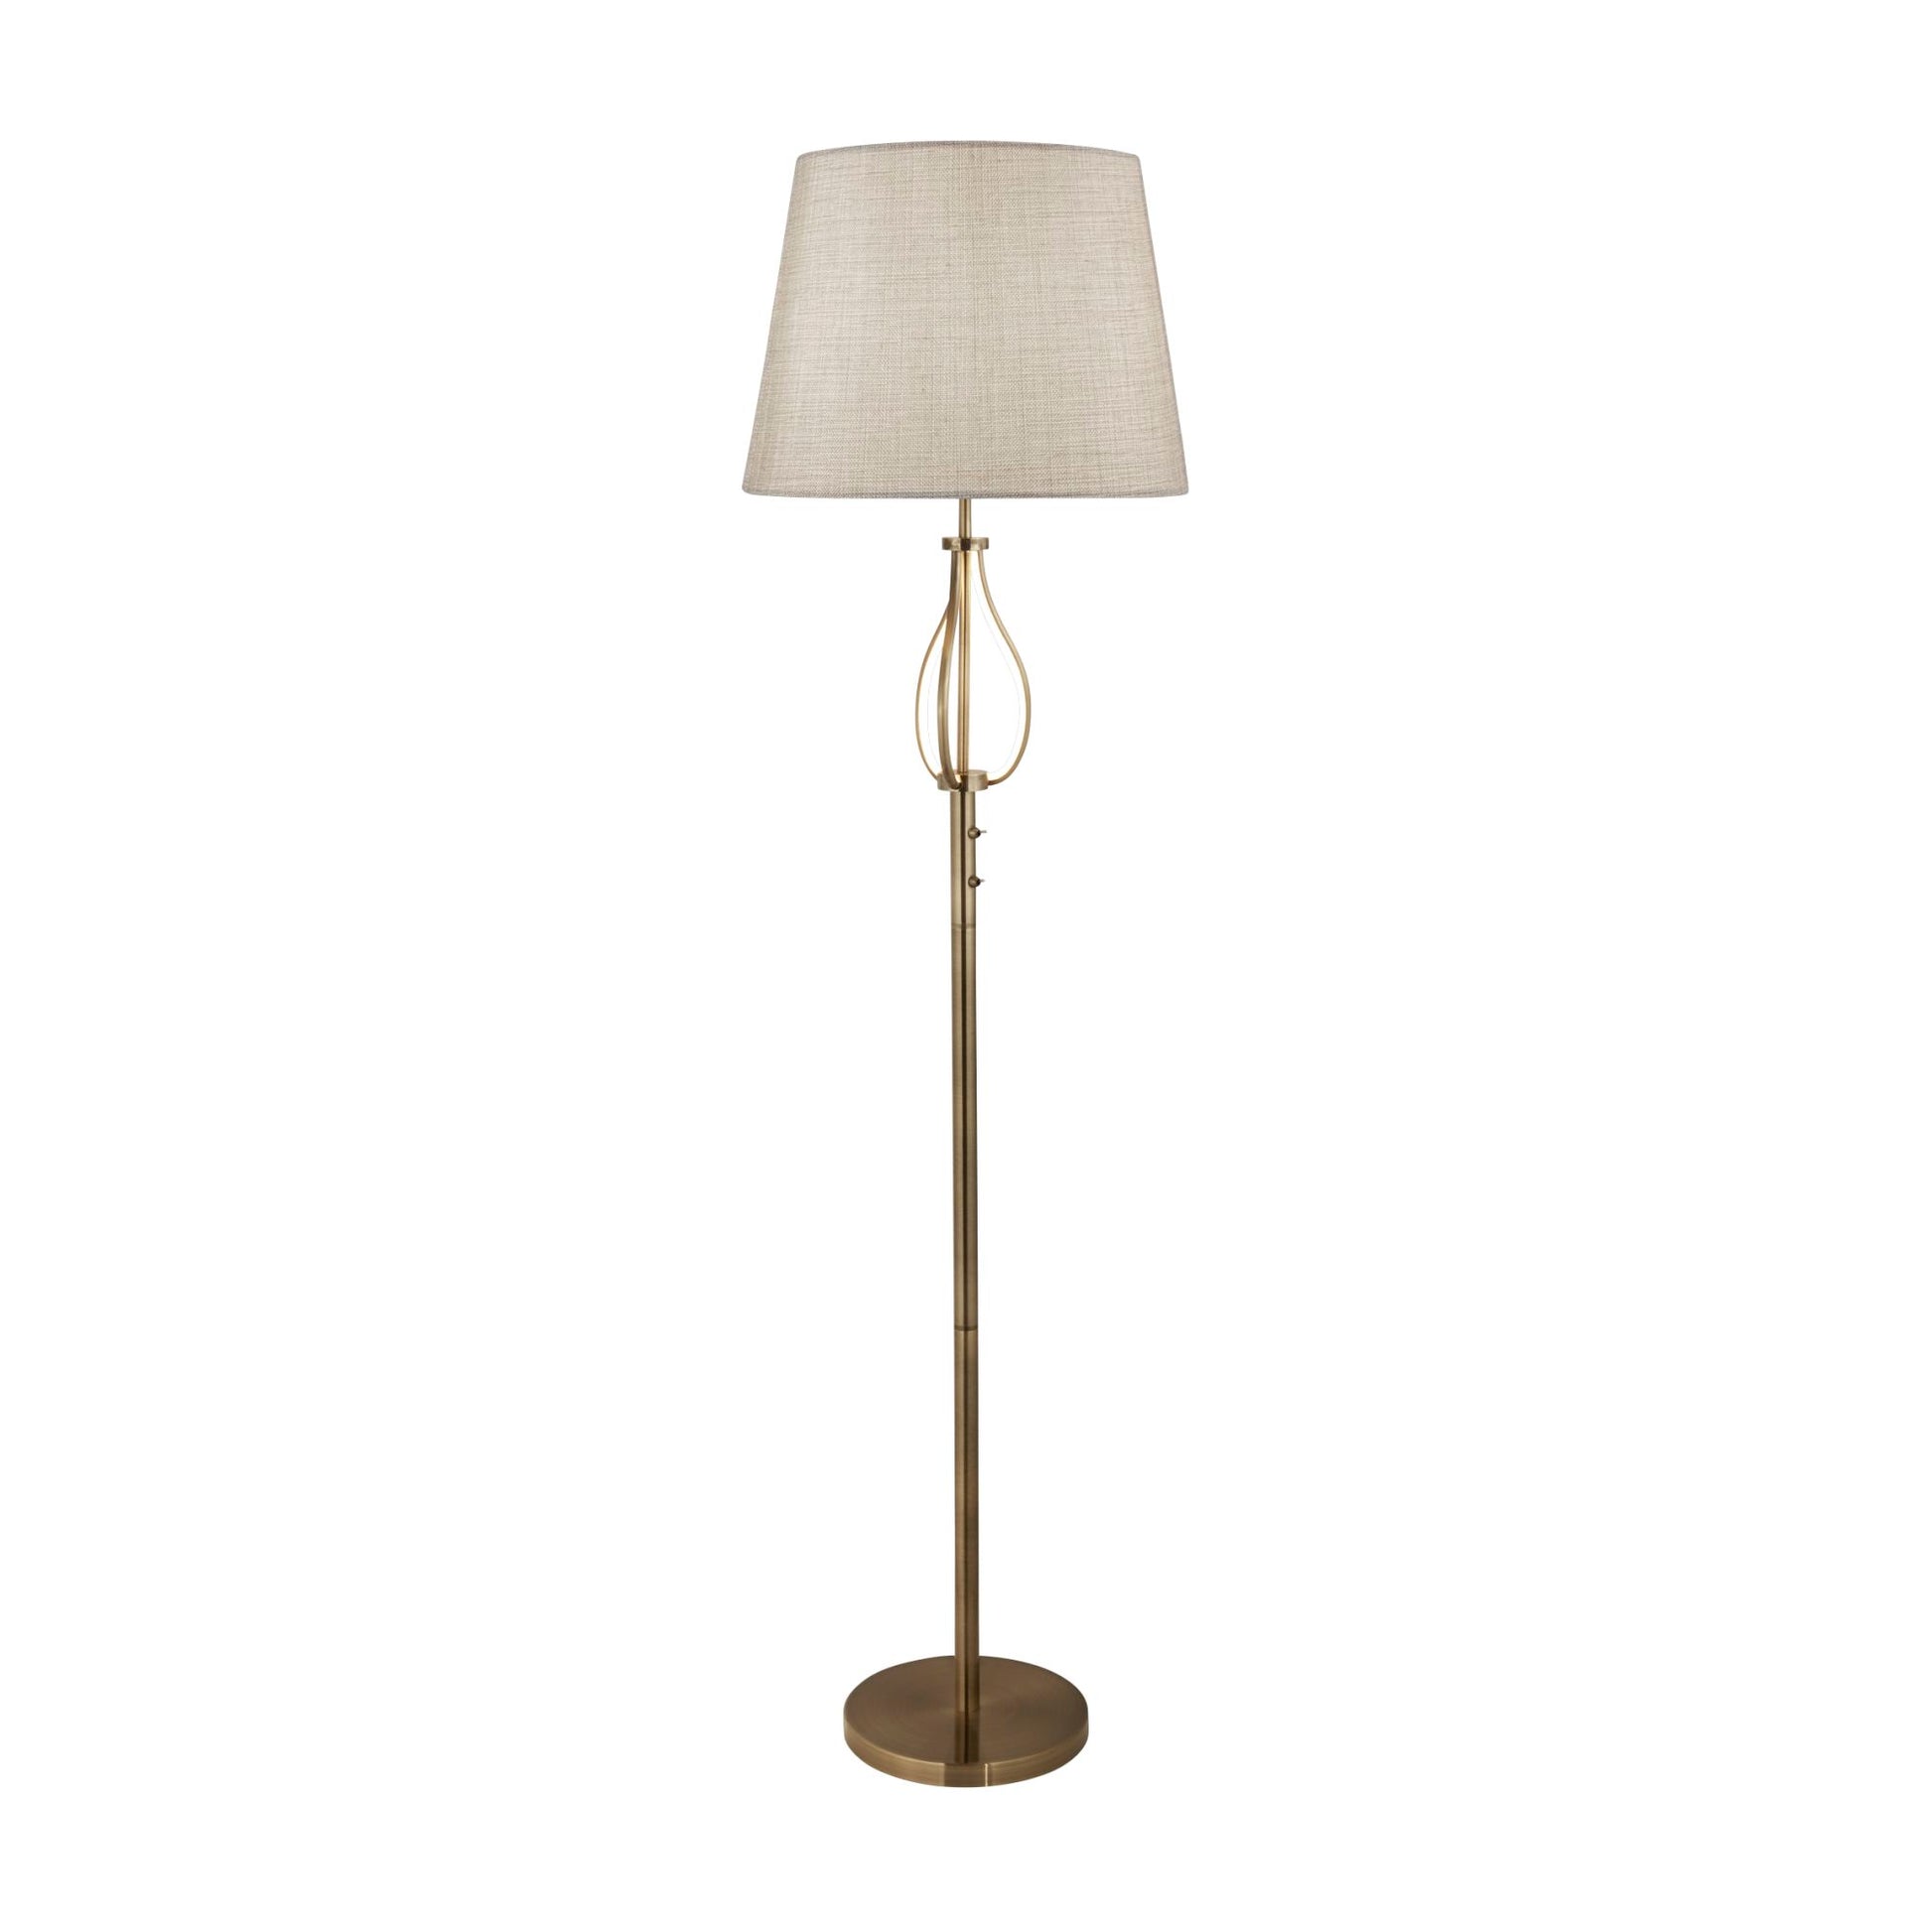 Vegas LED Antique Brass With Oatmeal Shade Floor Lamp